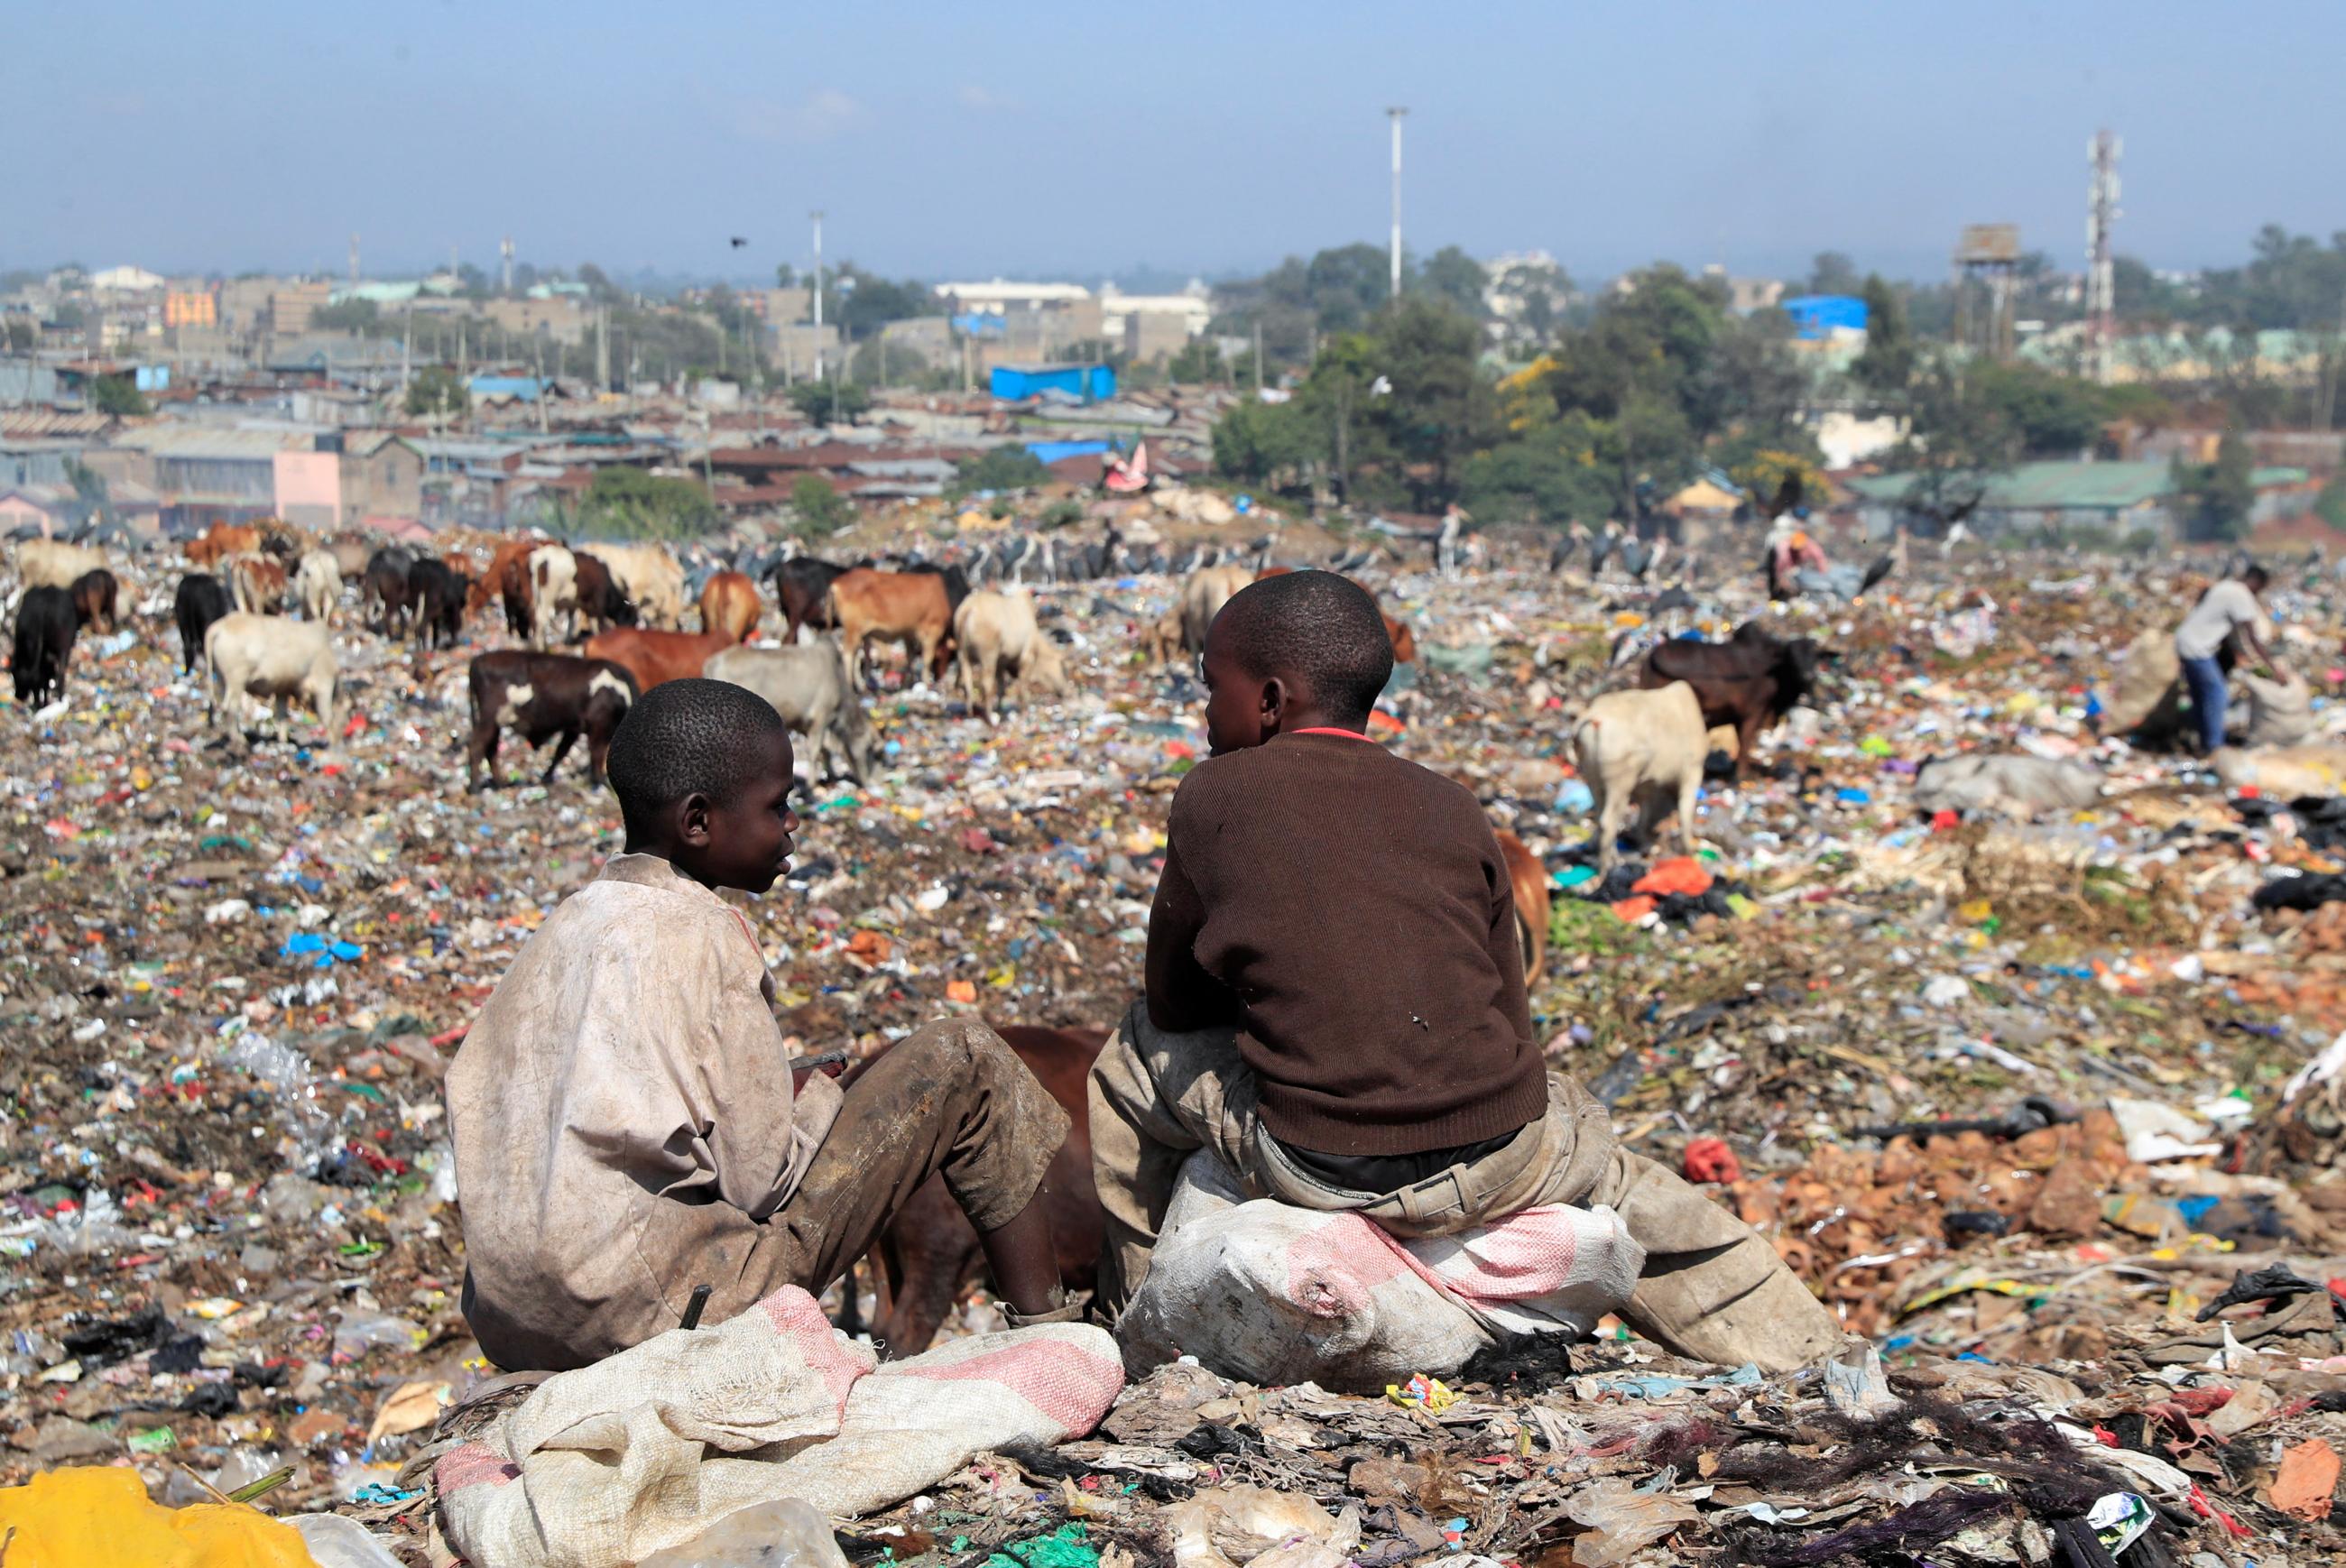 Two young boys sit on top of mountains of plastic waste with their backs turned to the camera in Nairobi, Kenya, in February 2022.